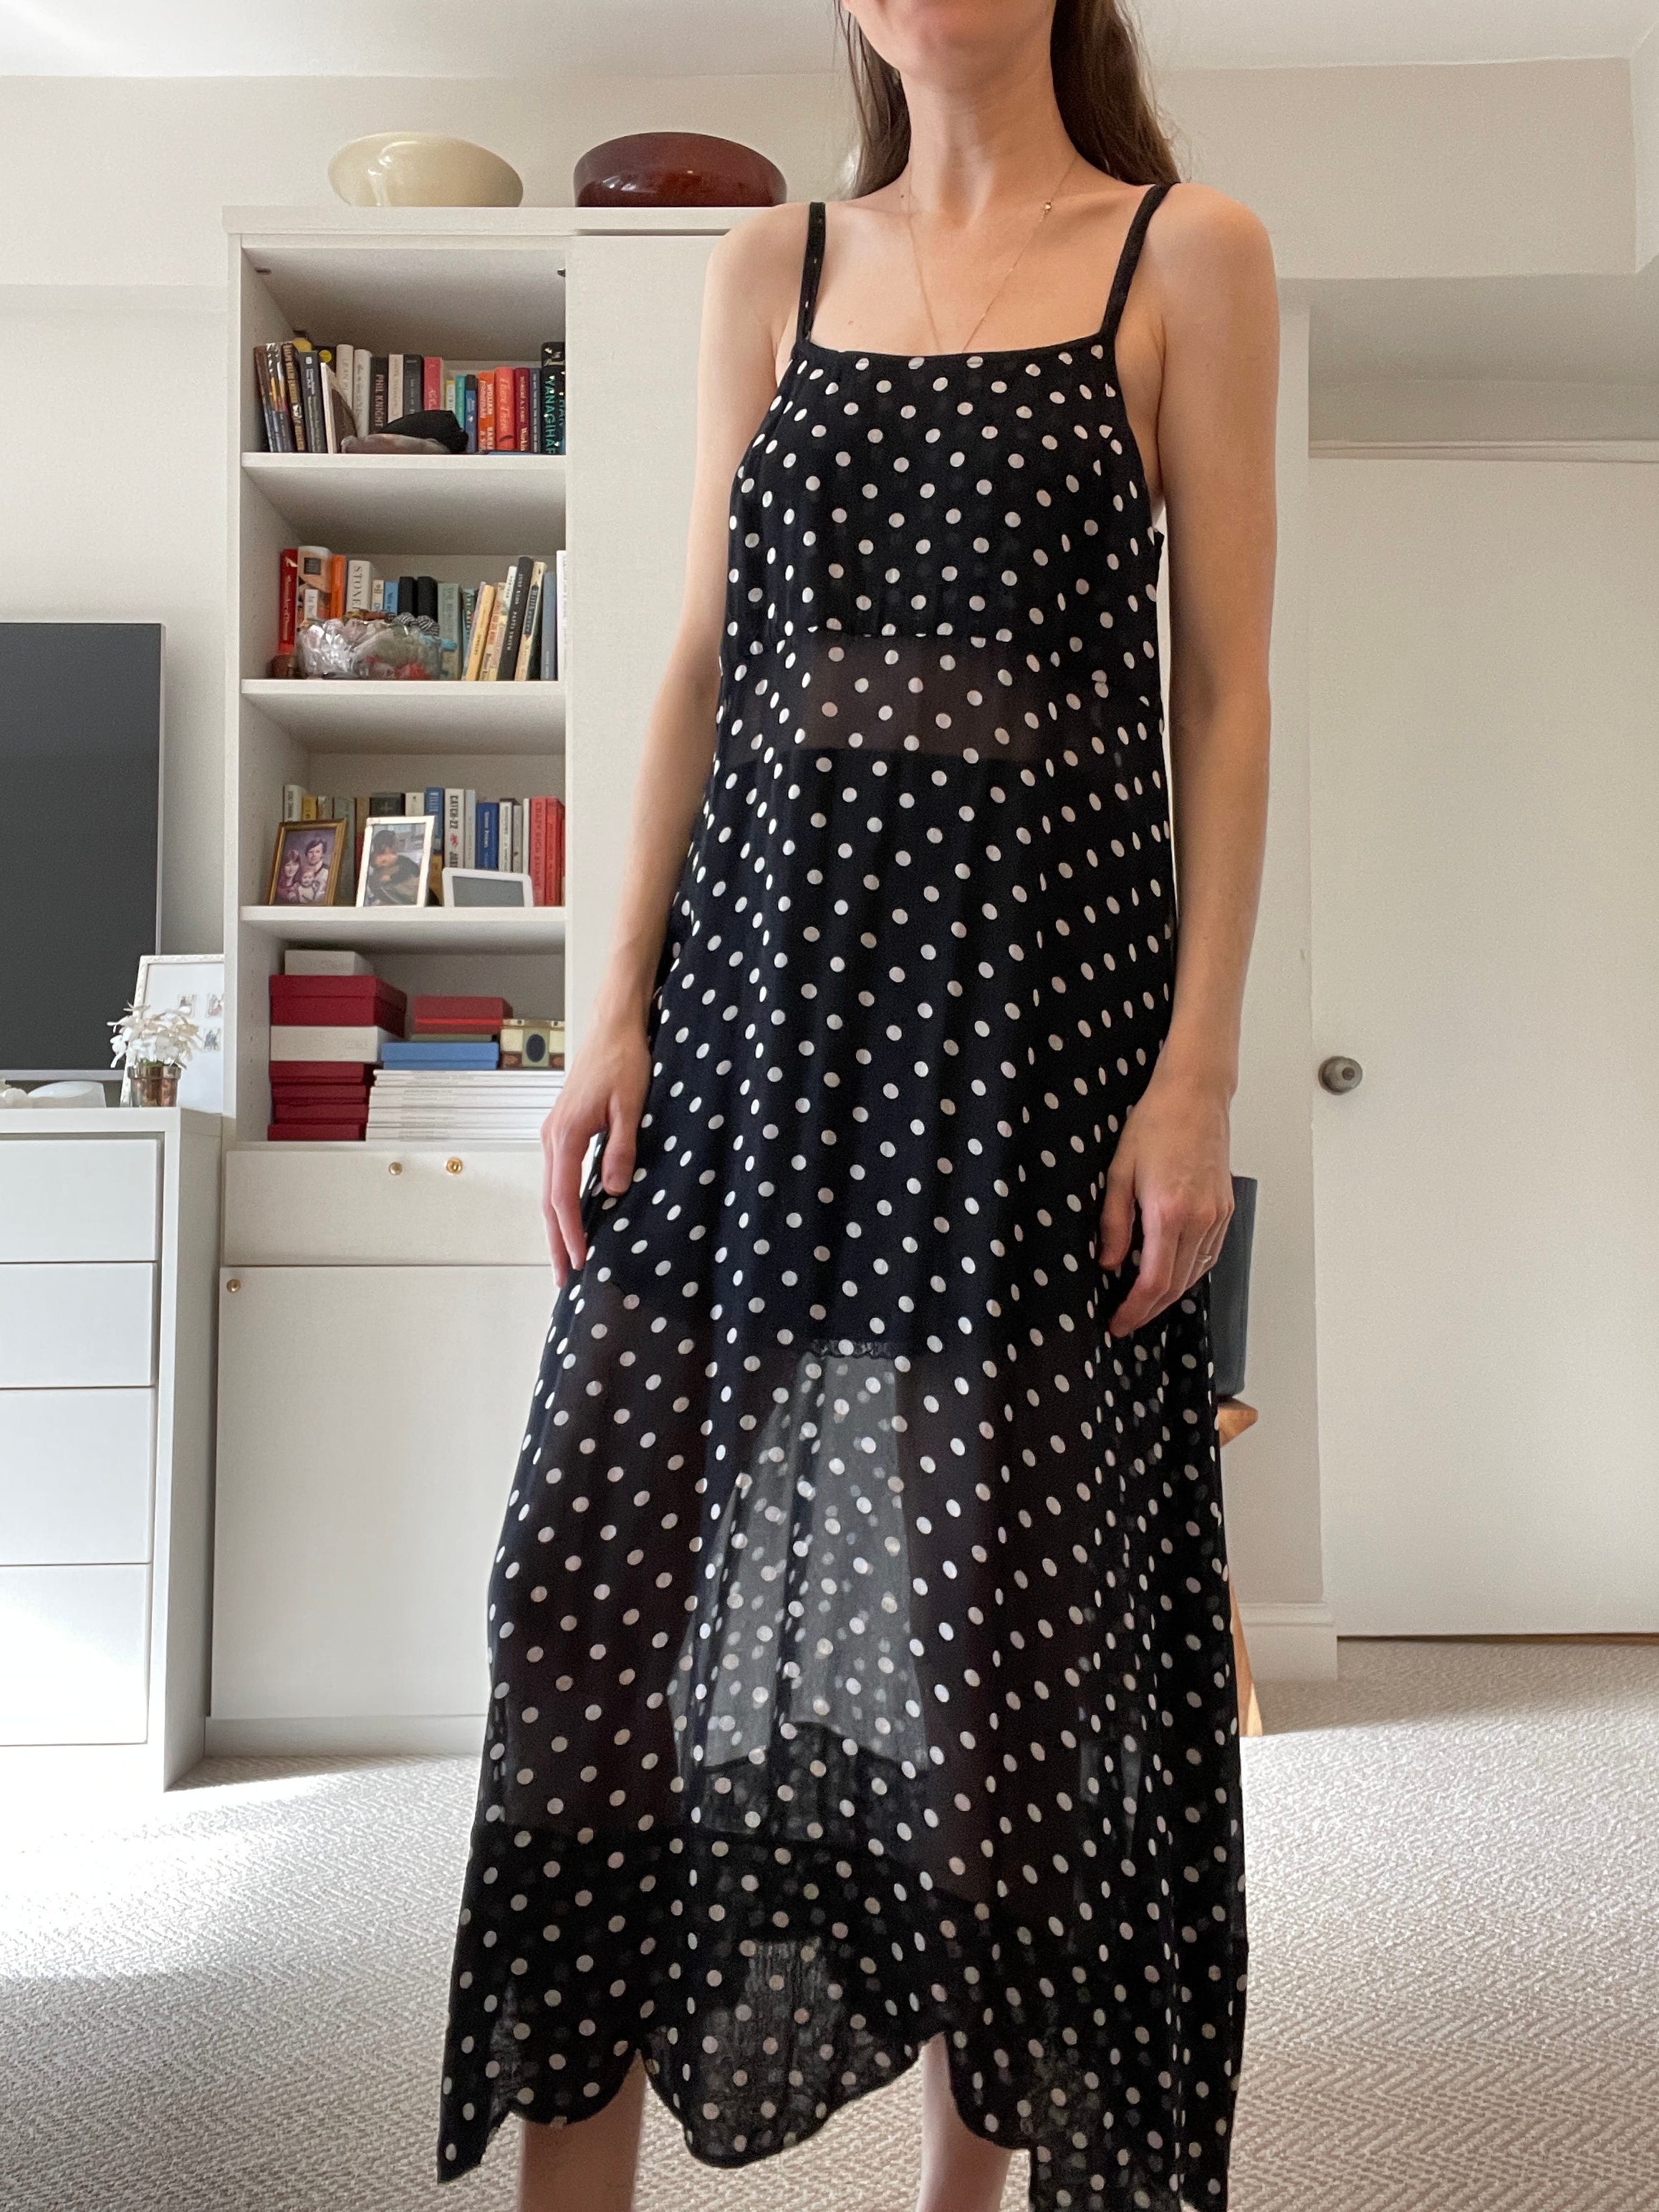 Wearing Sheer In Real Life - by Becky Malinsky